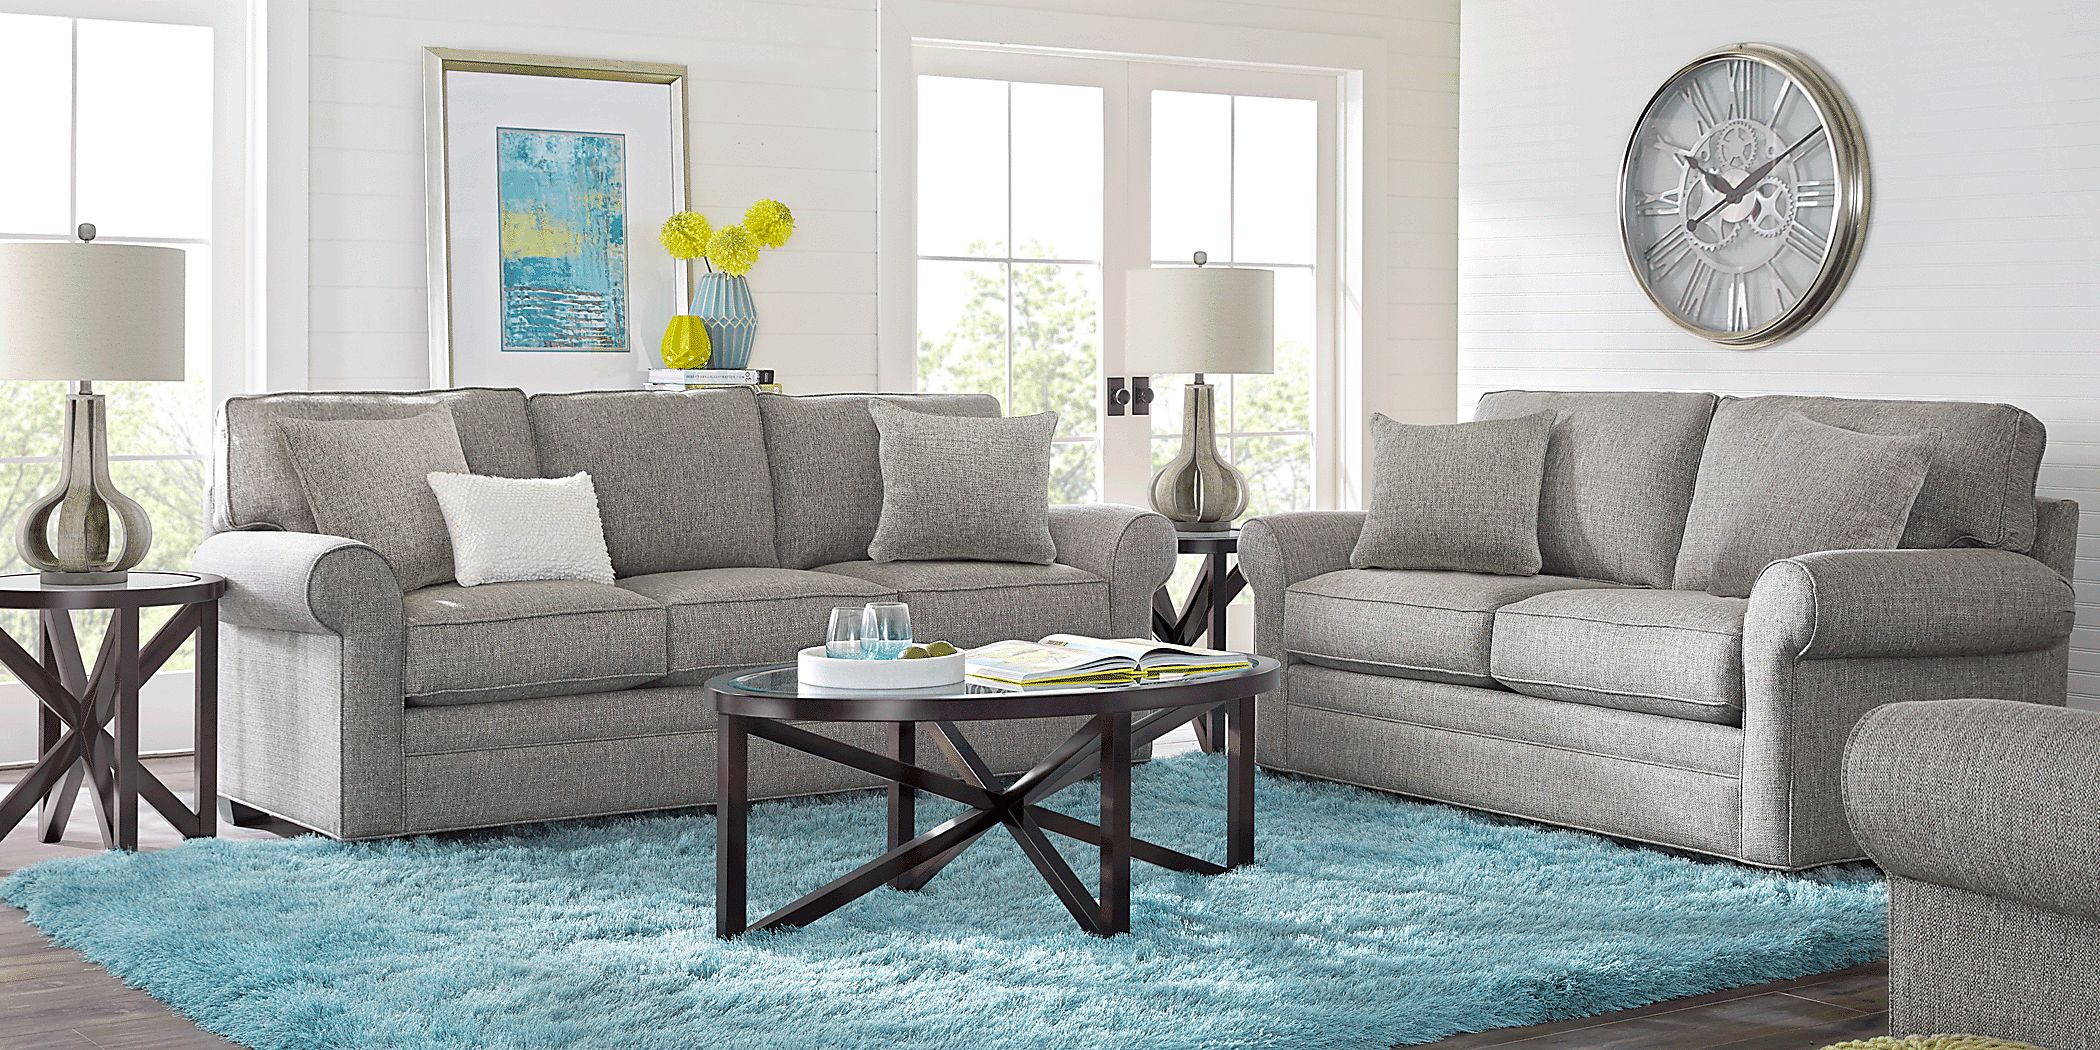 Cindy Crawford Home Bellingham Gray Textured 7 Pc Living Room with Sleeper Sofa